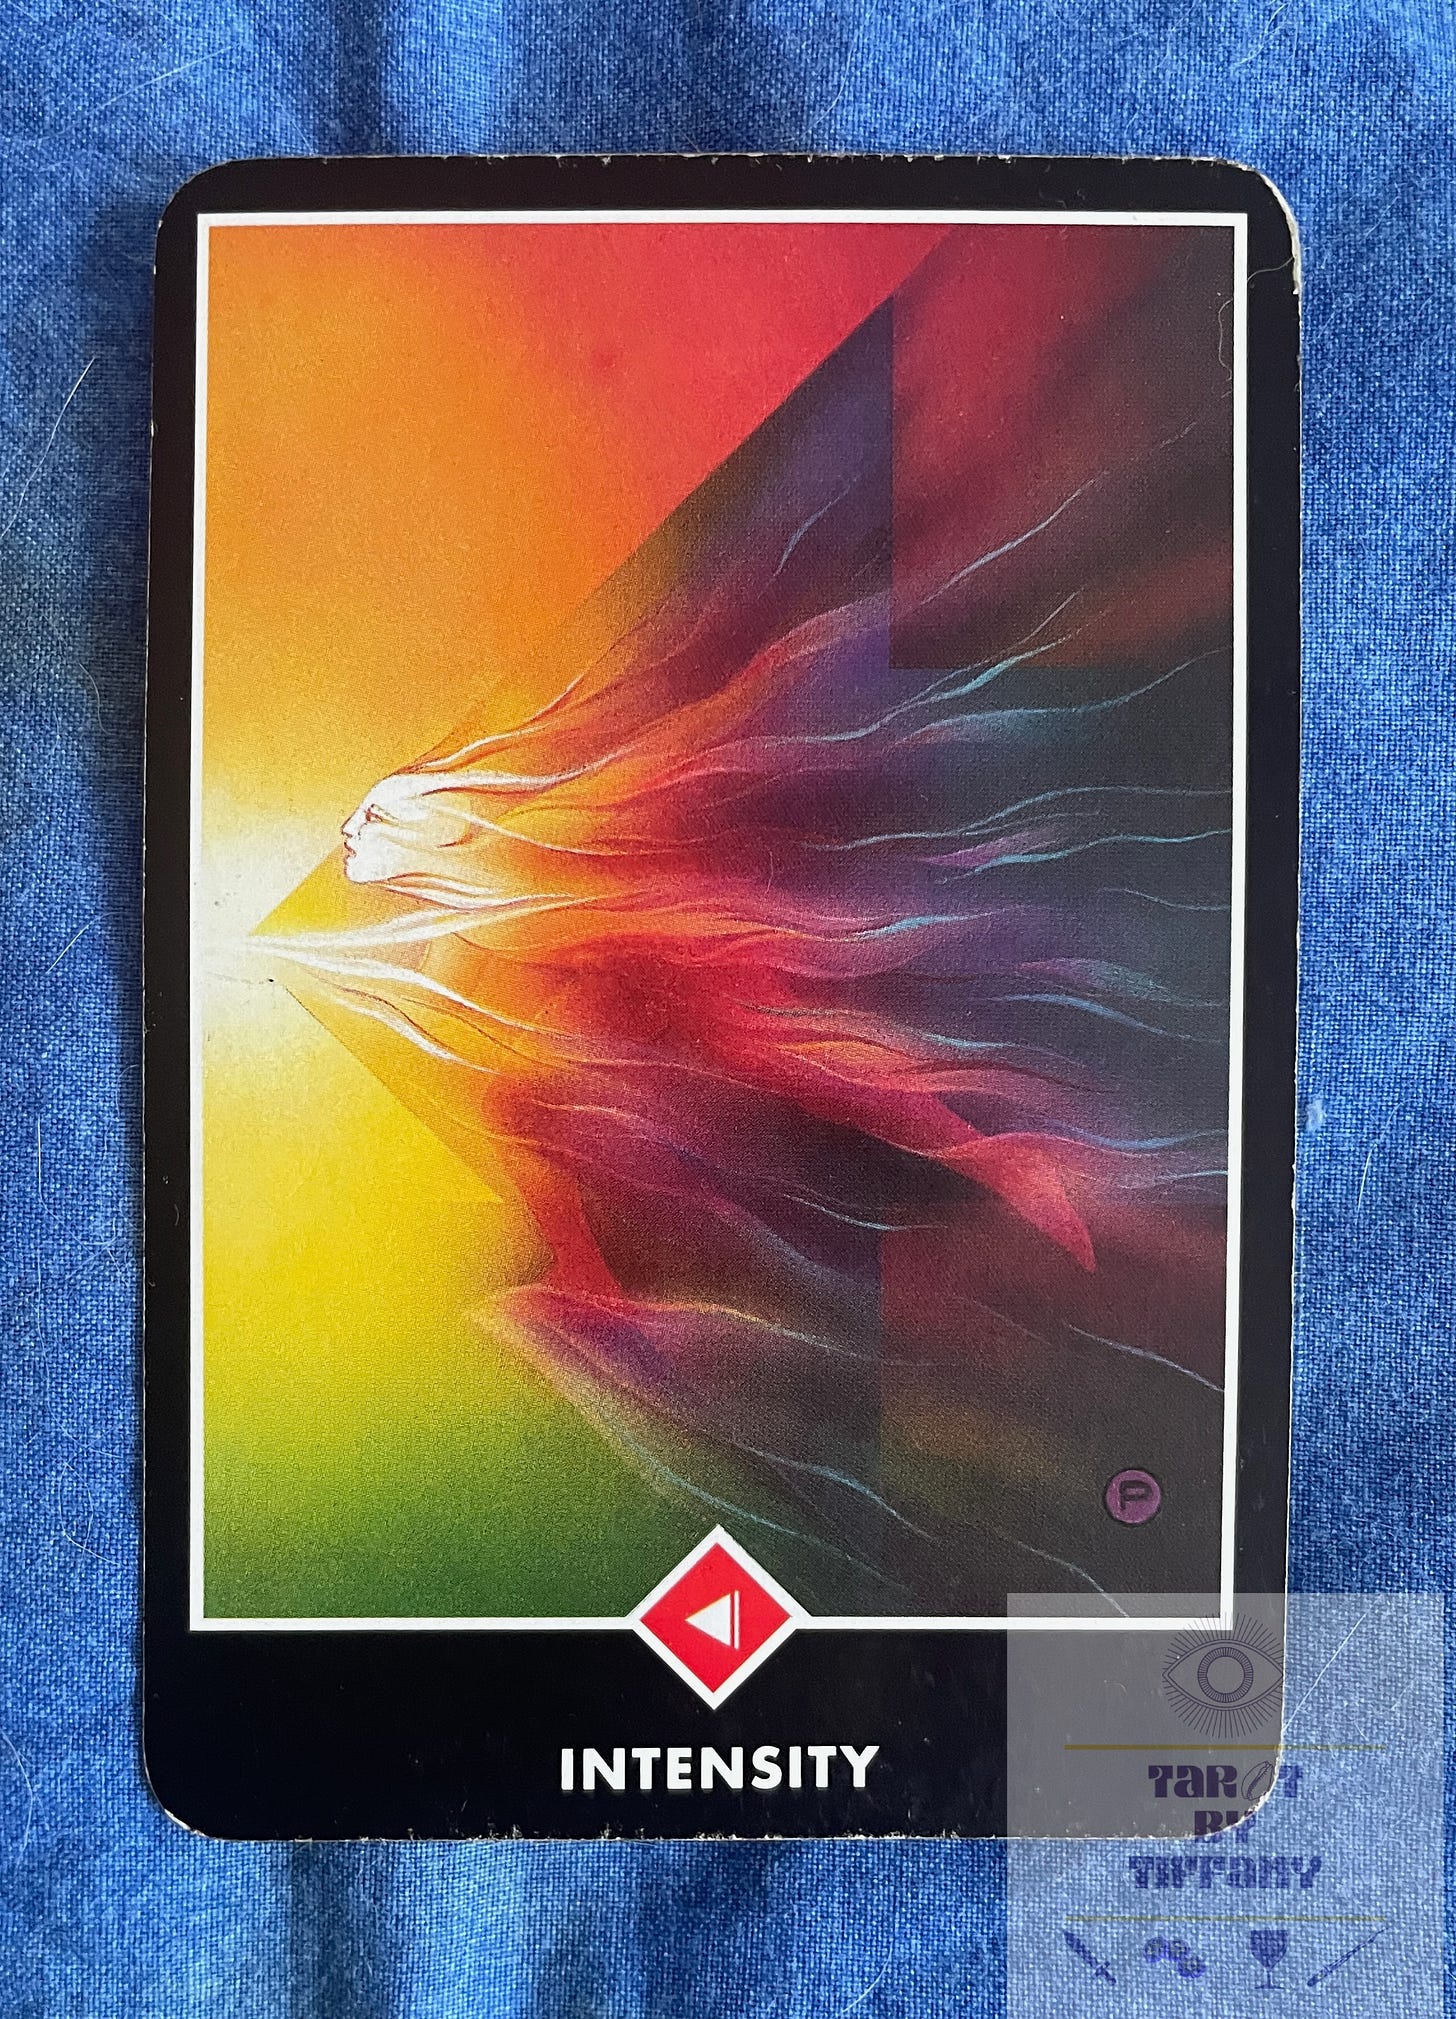 Image of the Knight of Wands (Intensity) card from the Osho Zen Tarot deck. The card is laid on a blue cloth background. The cad shows a person in a red, yellow, and purplish whirlwind that comes to a point like an arrow facing left. It is a dynamic image that invokes fast movement.